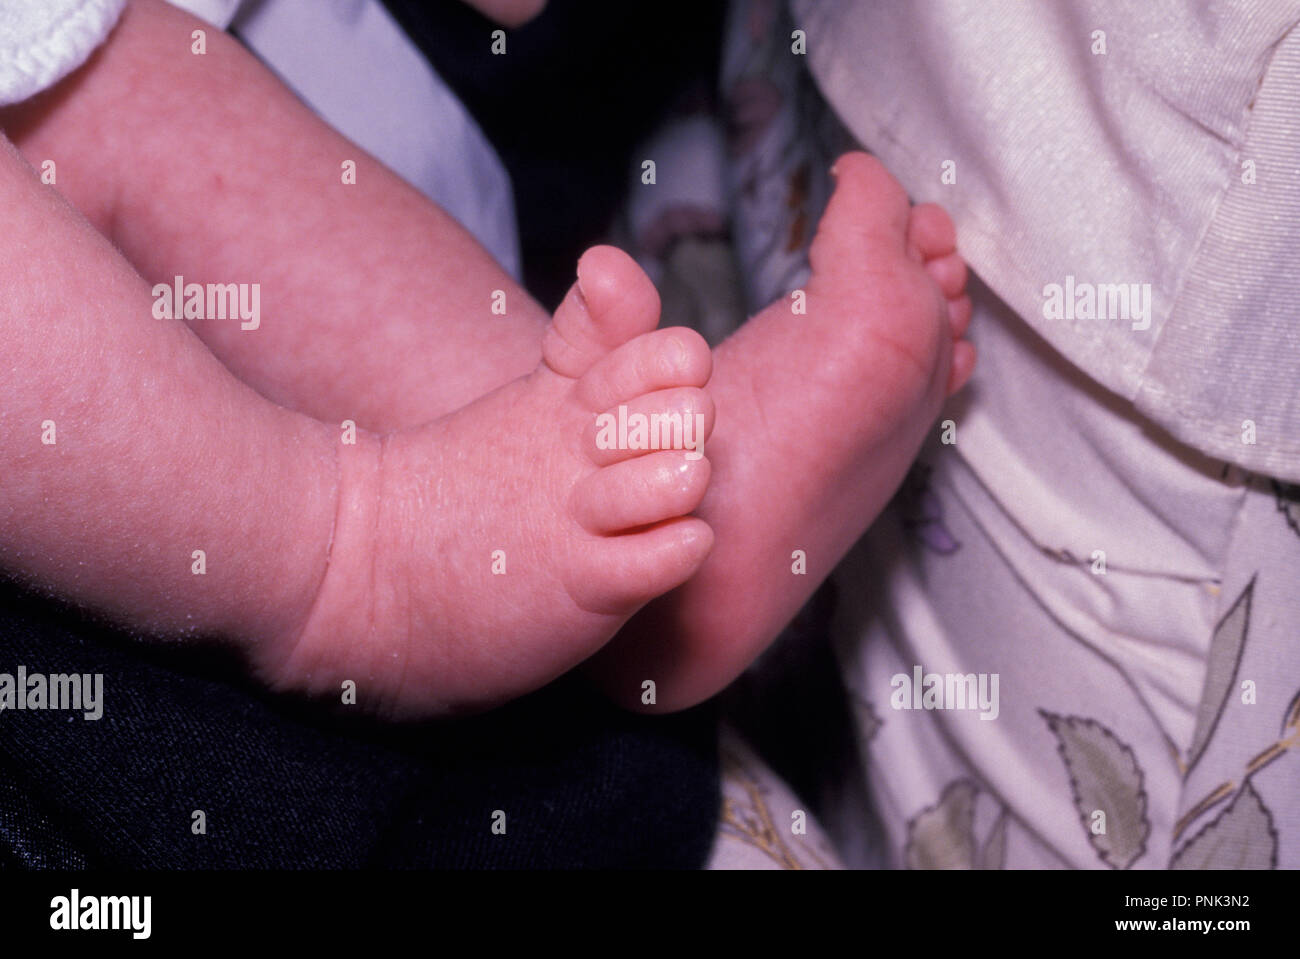 NOT 821516 MALE INFANT TOES THREE WEEKS OLD Stock Photo